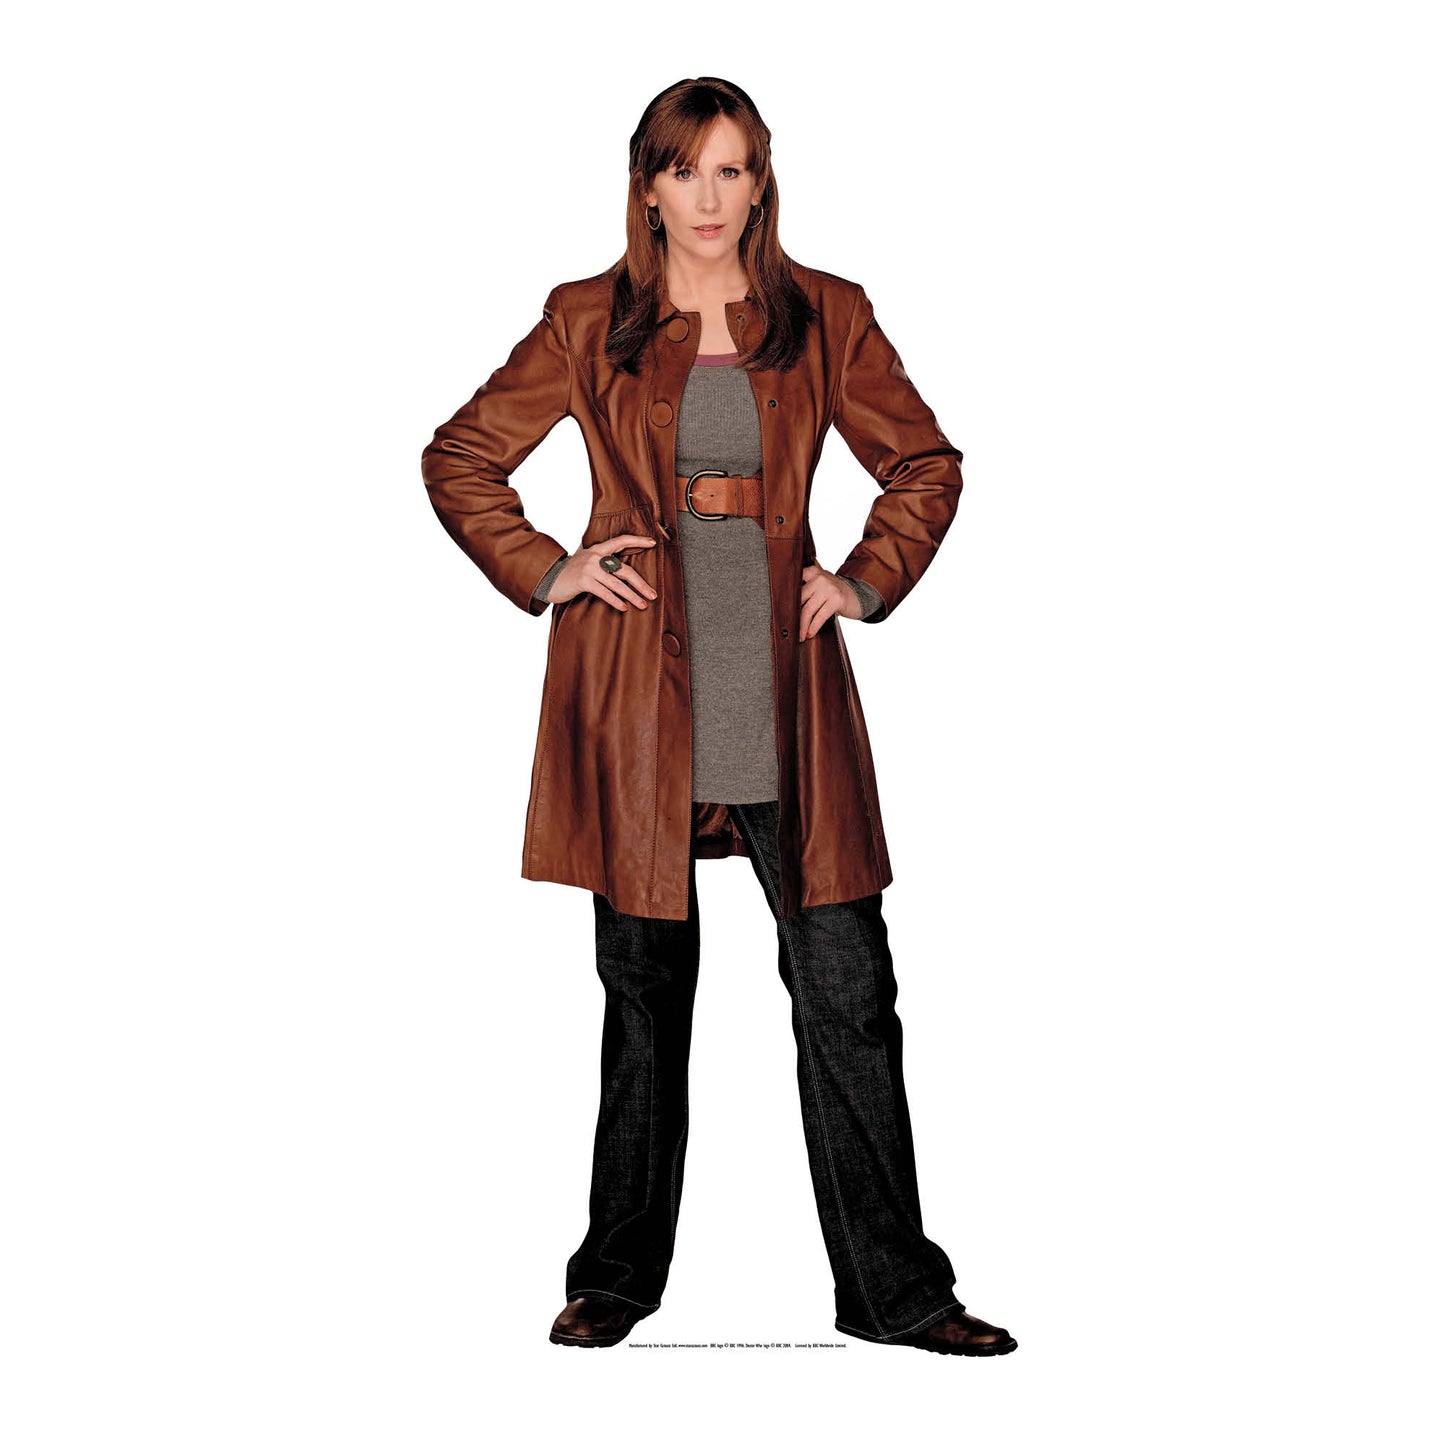 Donna Noble Cardboard Cut Out Height 169cm - Star Cutouts